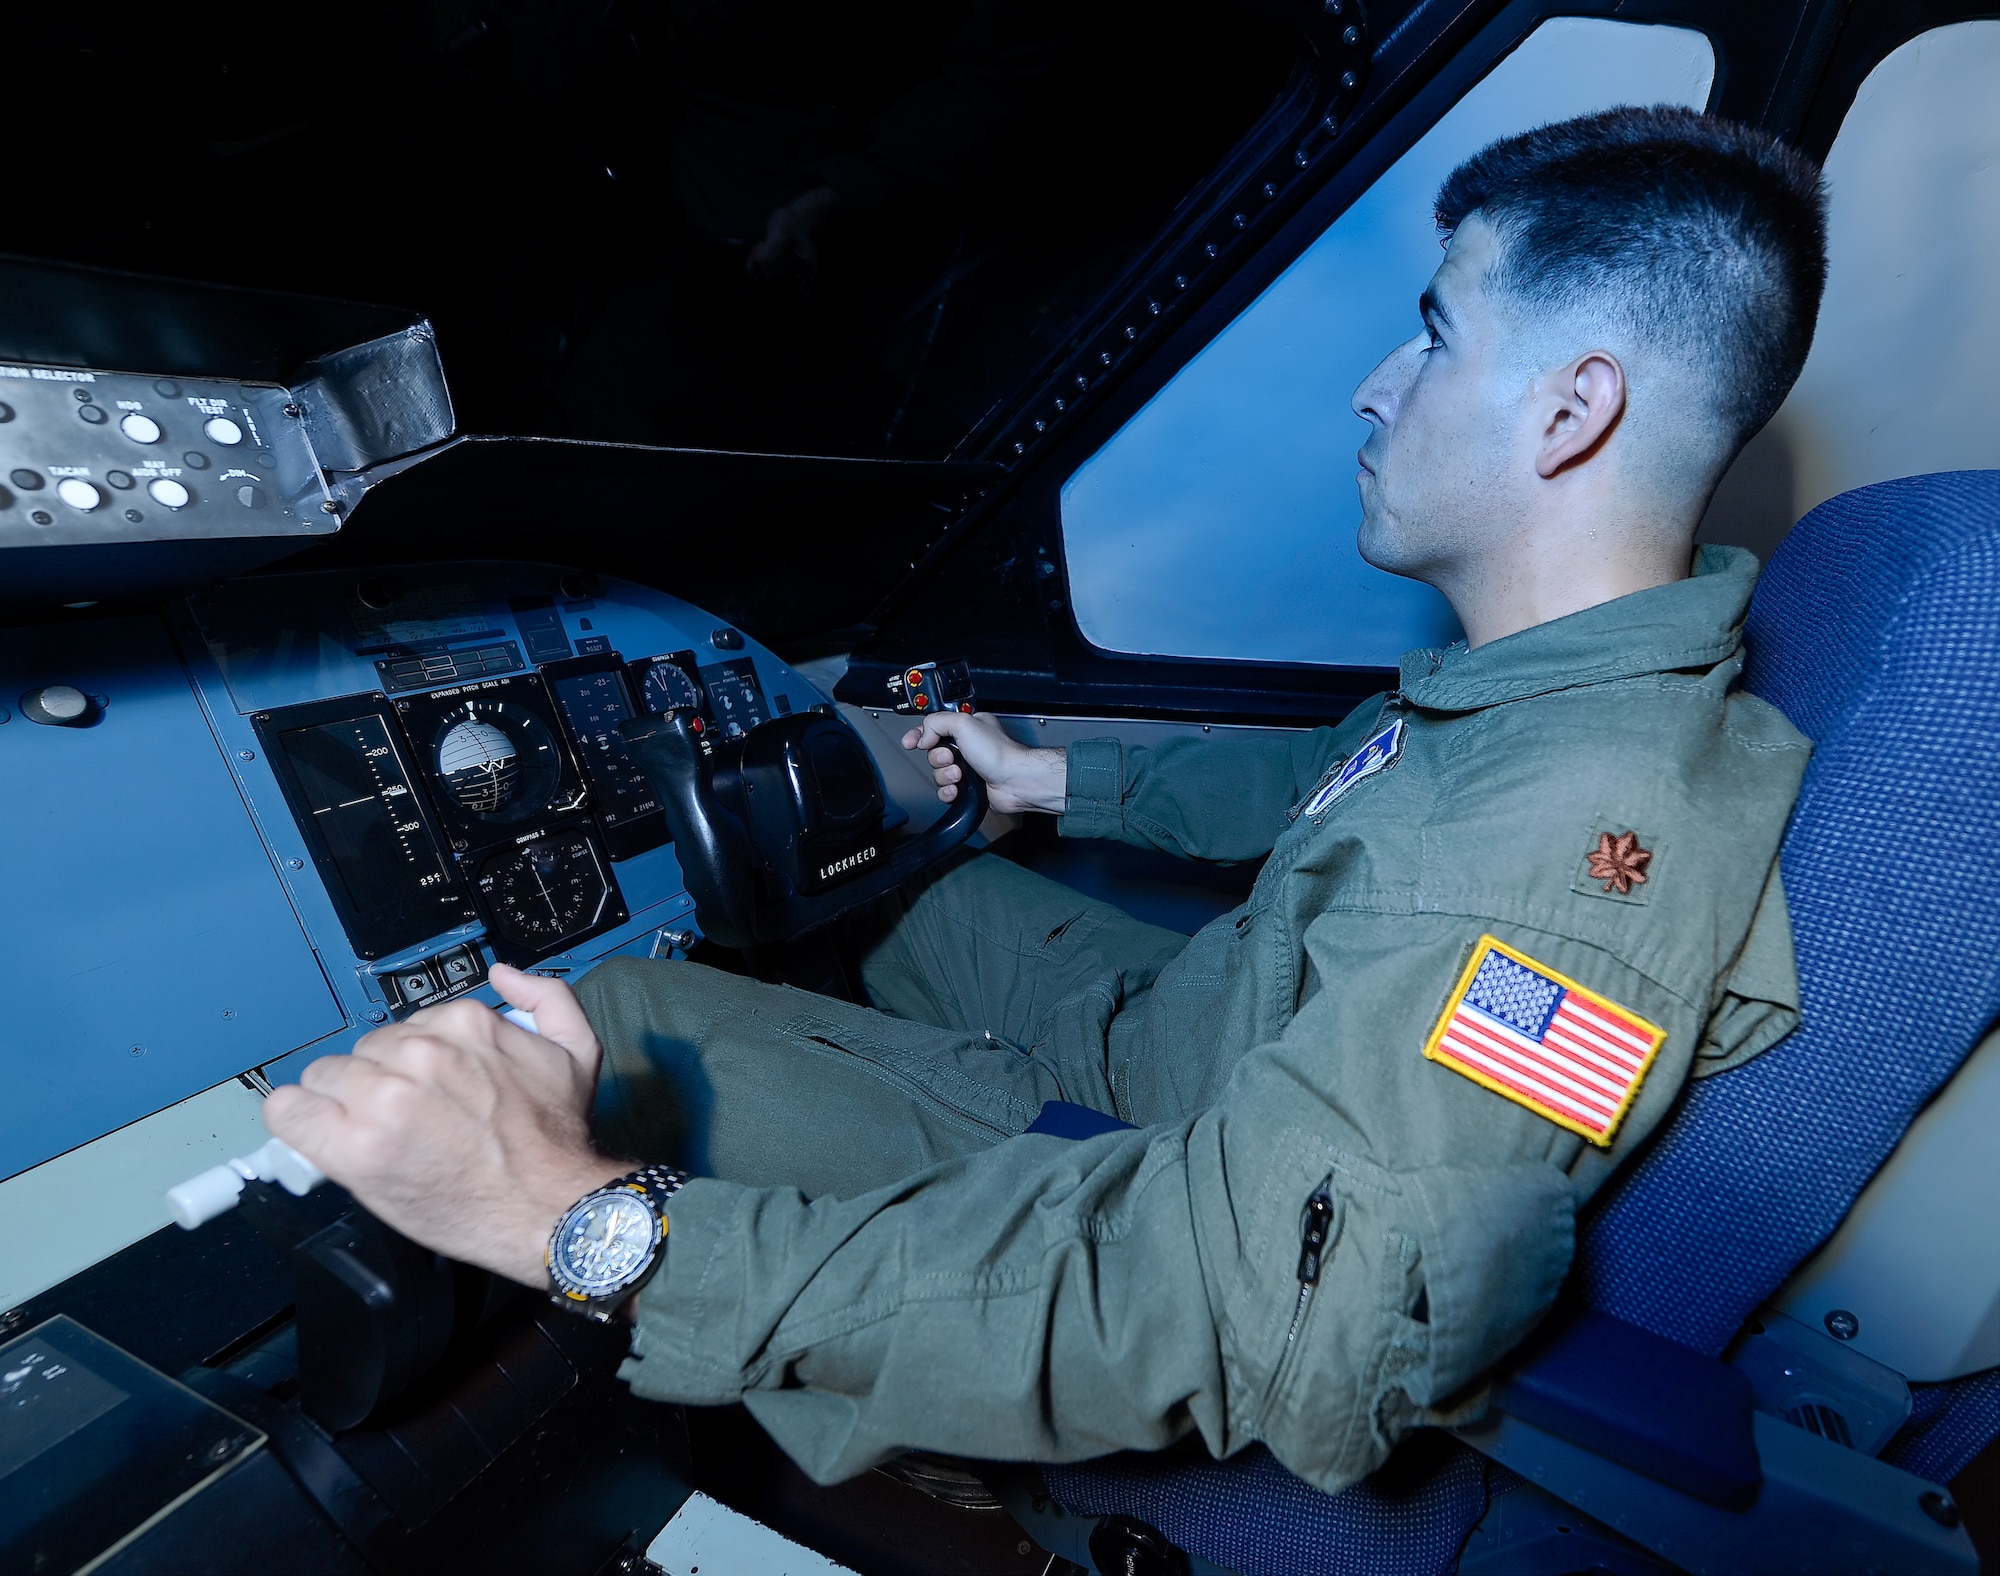 Maj. Thomas Moseder, a C-5M instructor pilot, concentrates while practicing air-refueling training inside the C-5 Air Refueling Partial Task Trainer July 23, 2014, at Dover Air Force Base, Del. The AR PTT is unlike full-motion simulators where the cockpit in which the pilot is seated moves. Instead, the visuals presented to the pilot are produced by moving a large model in relation to refraction lenses, mirrors and a lighting array to provide a very realistic experience at low cost. (U.S. Air Force photo/Greg L. Davis)